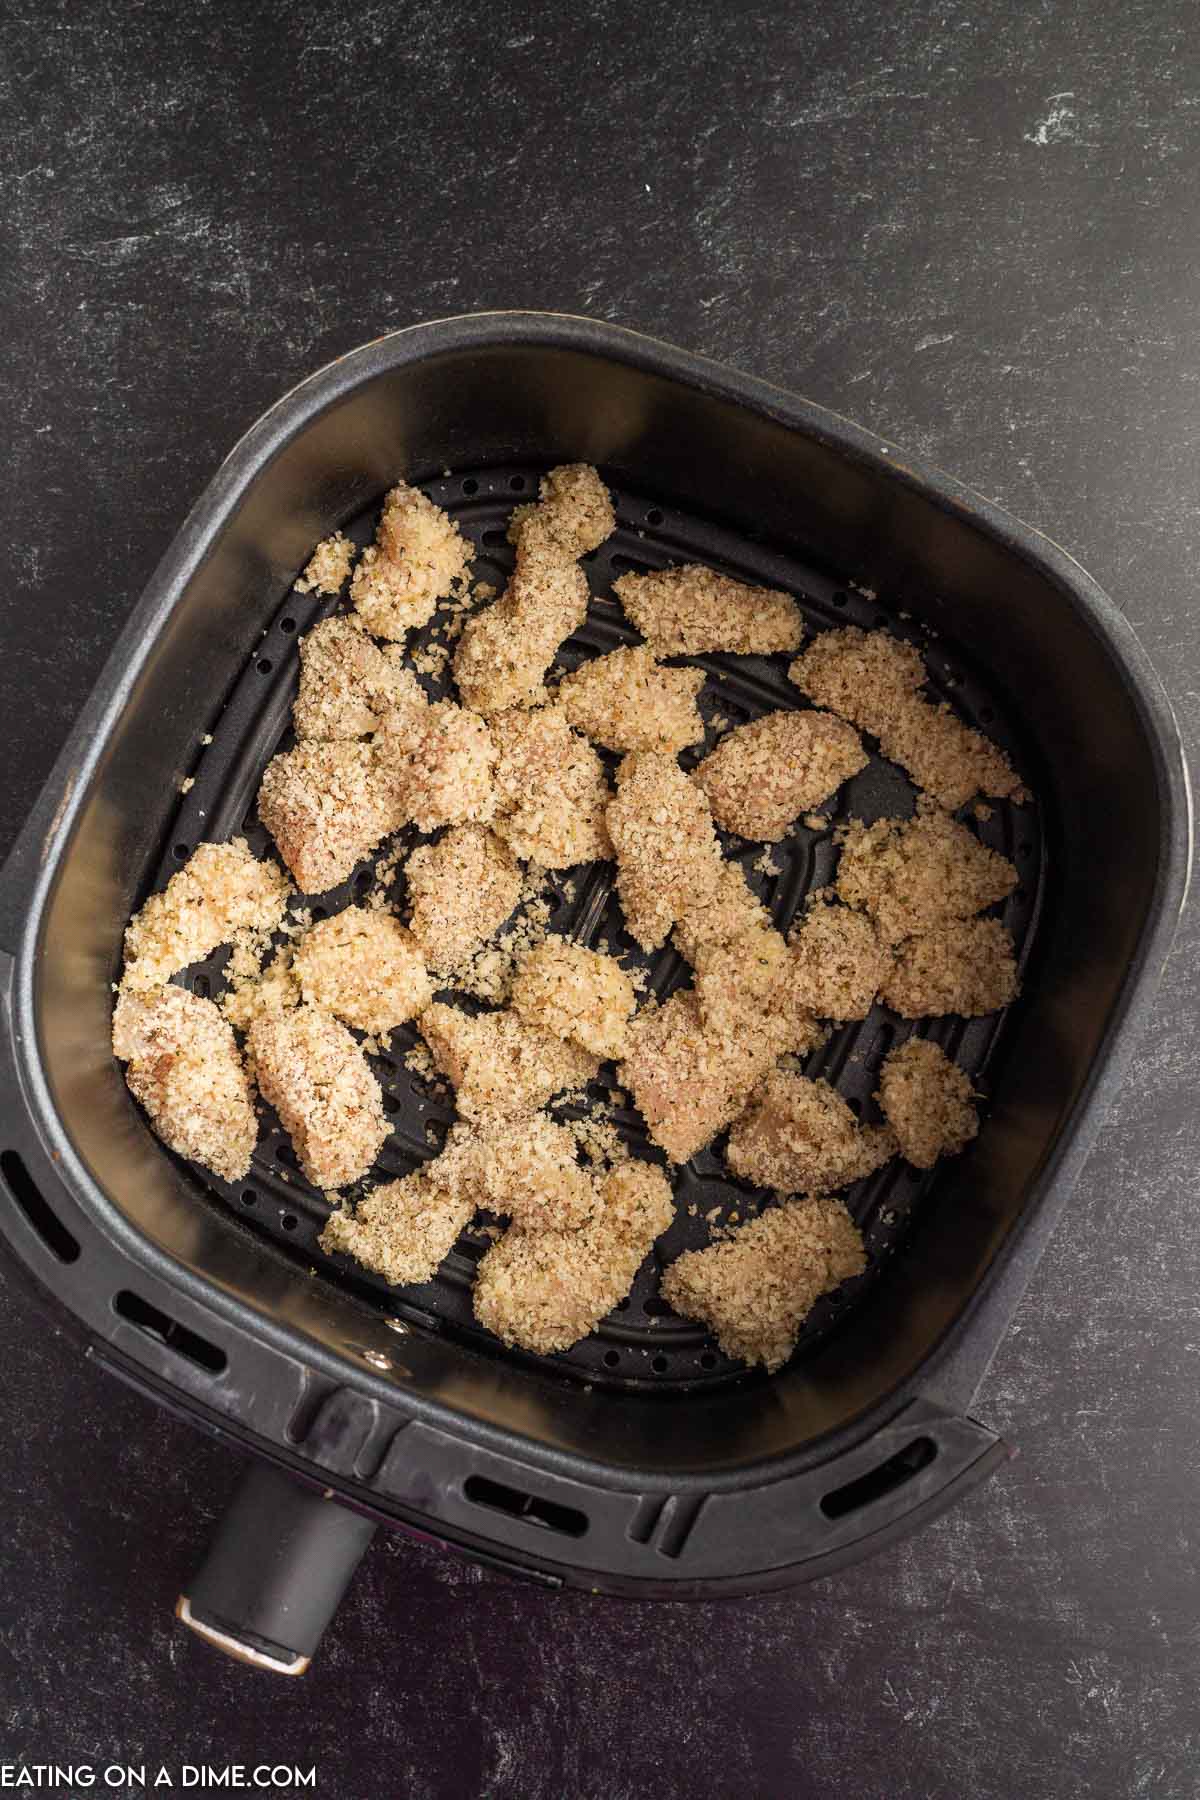 Breadcrumb coated bite size chicken in the air fryer basket